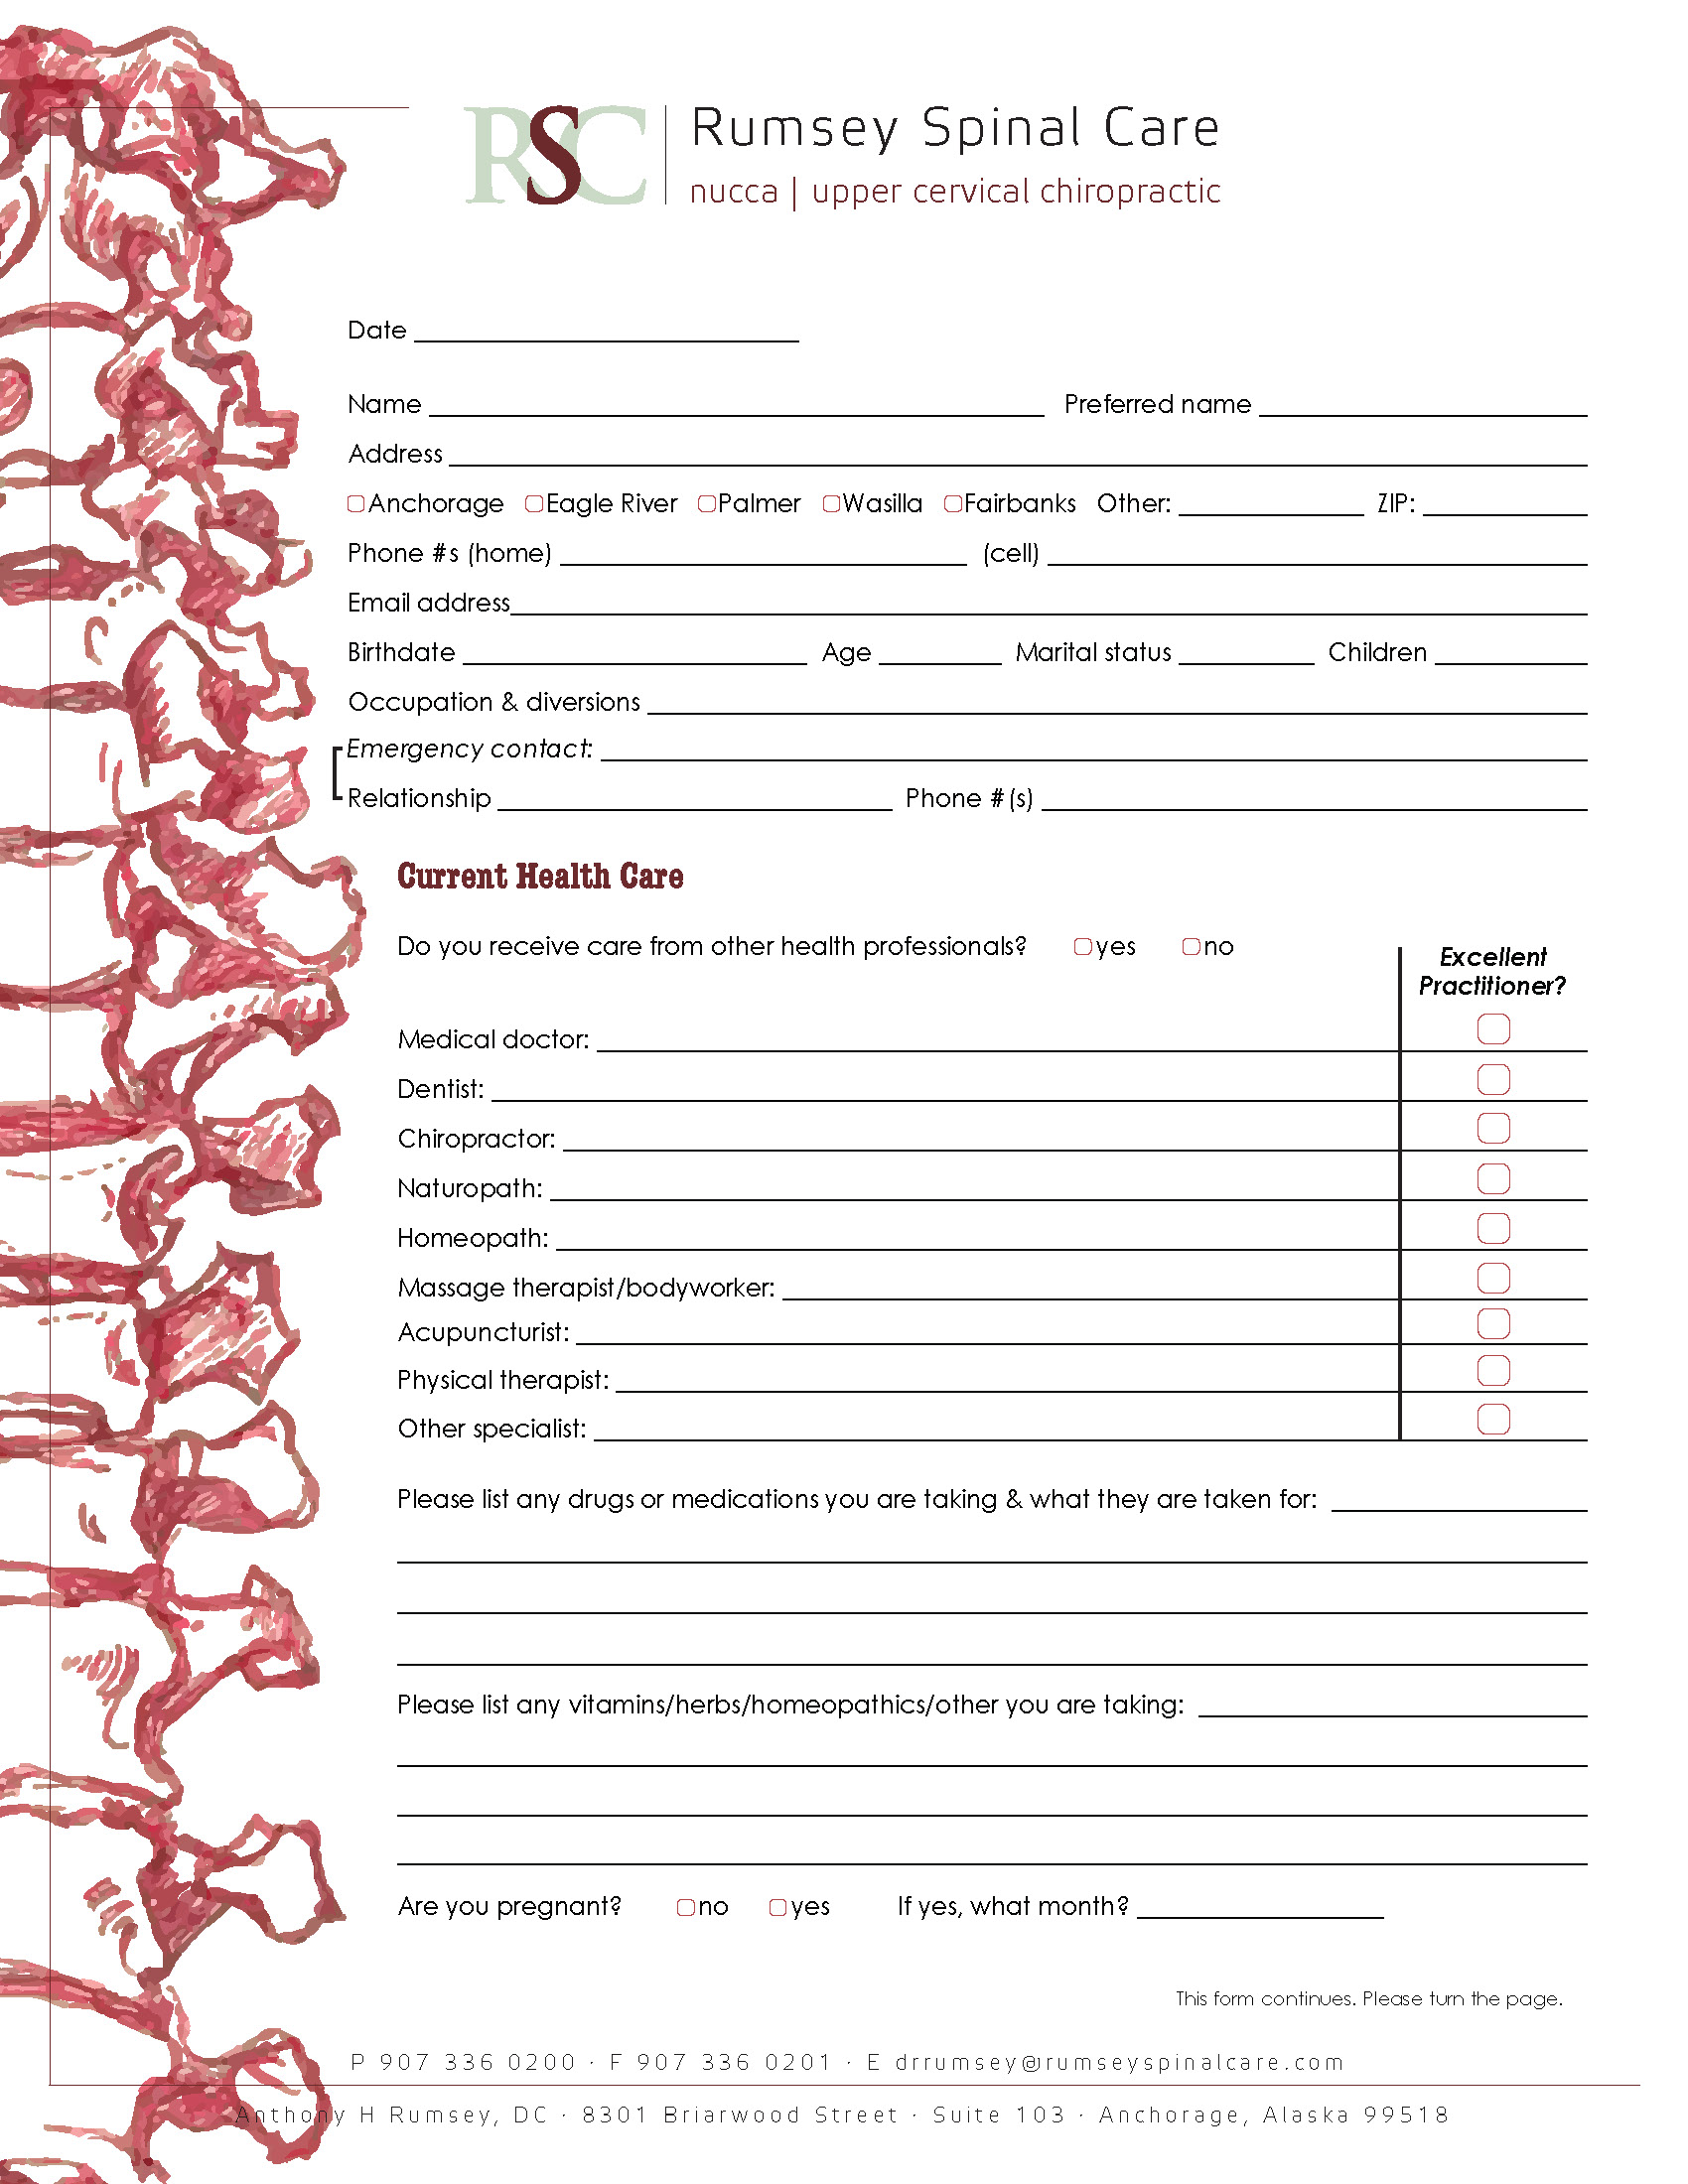 forms-directions-rumsey-spinal-care